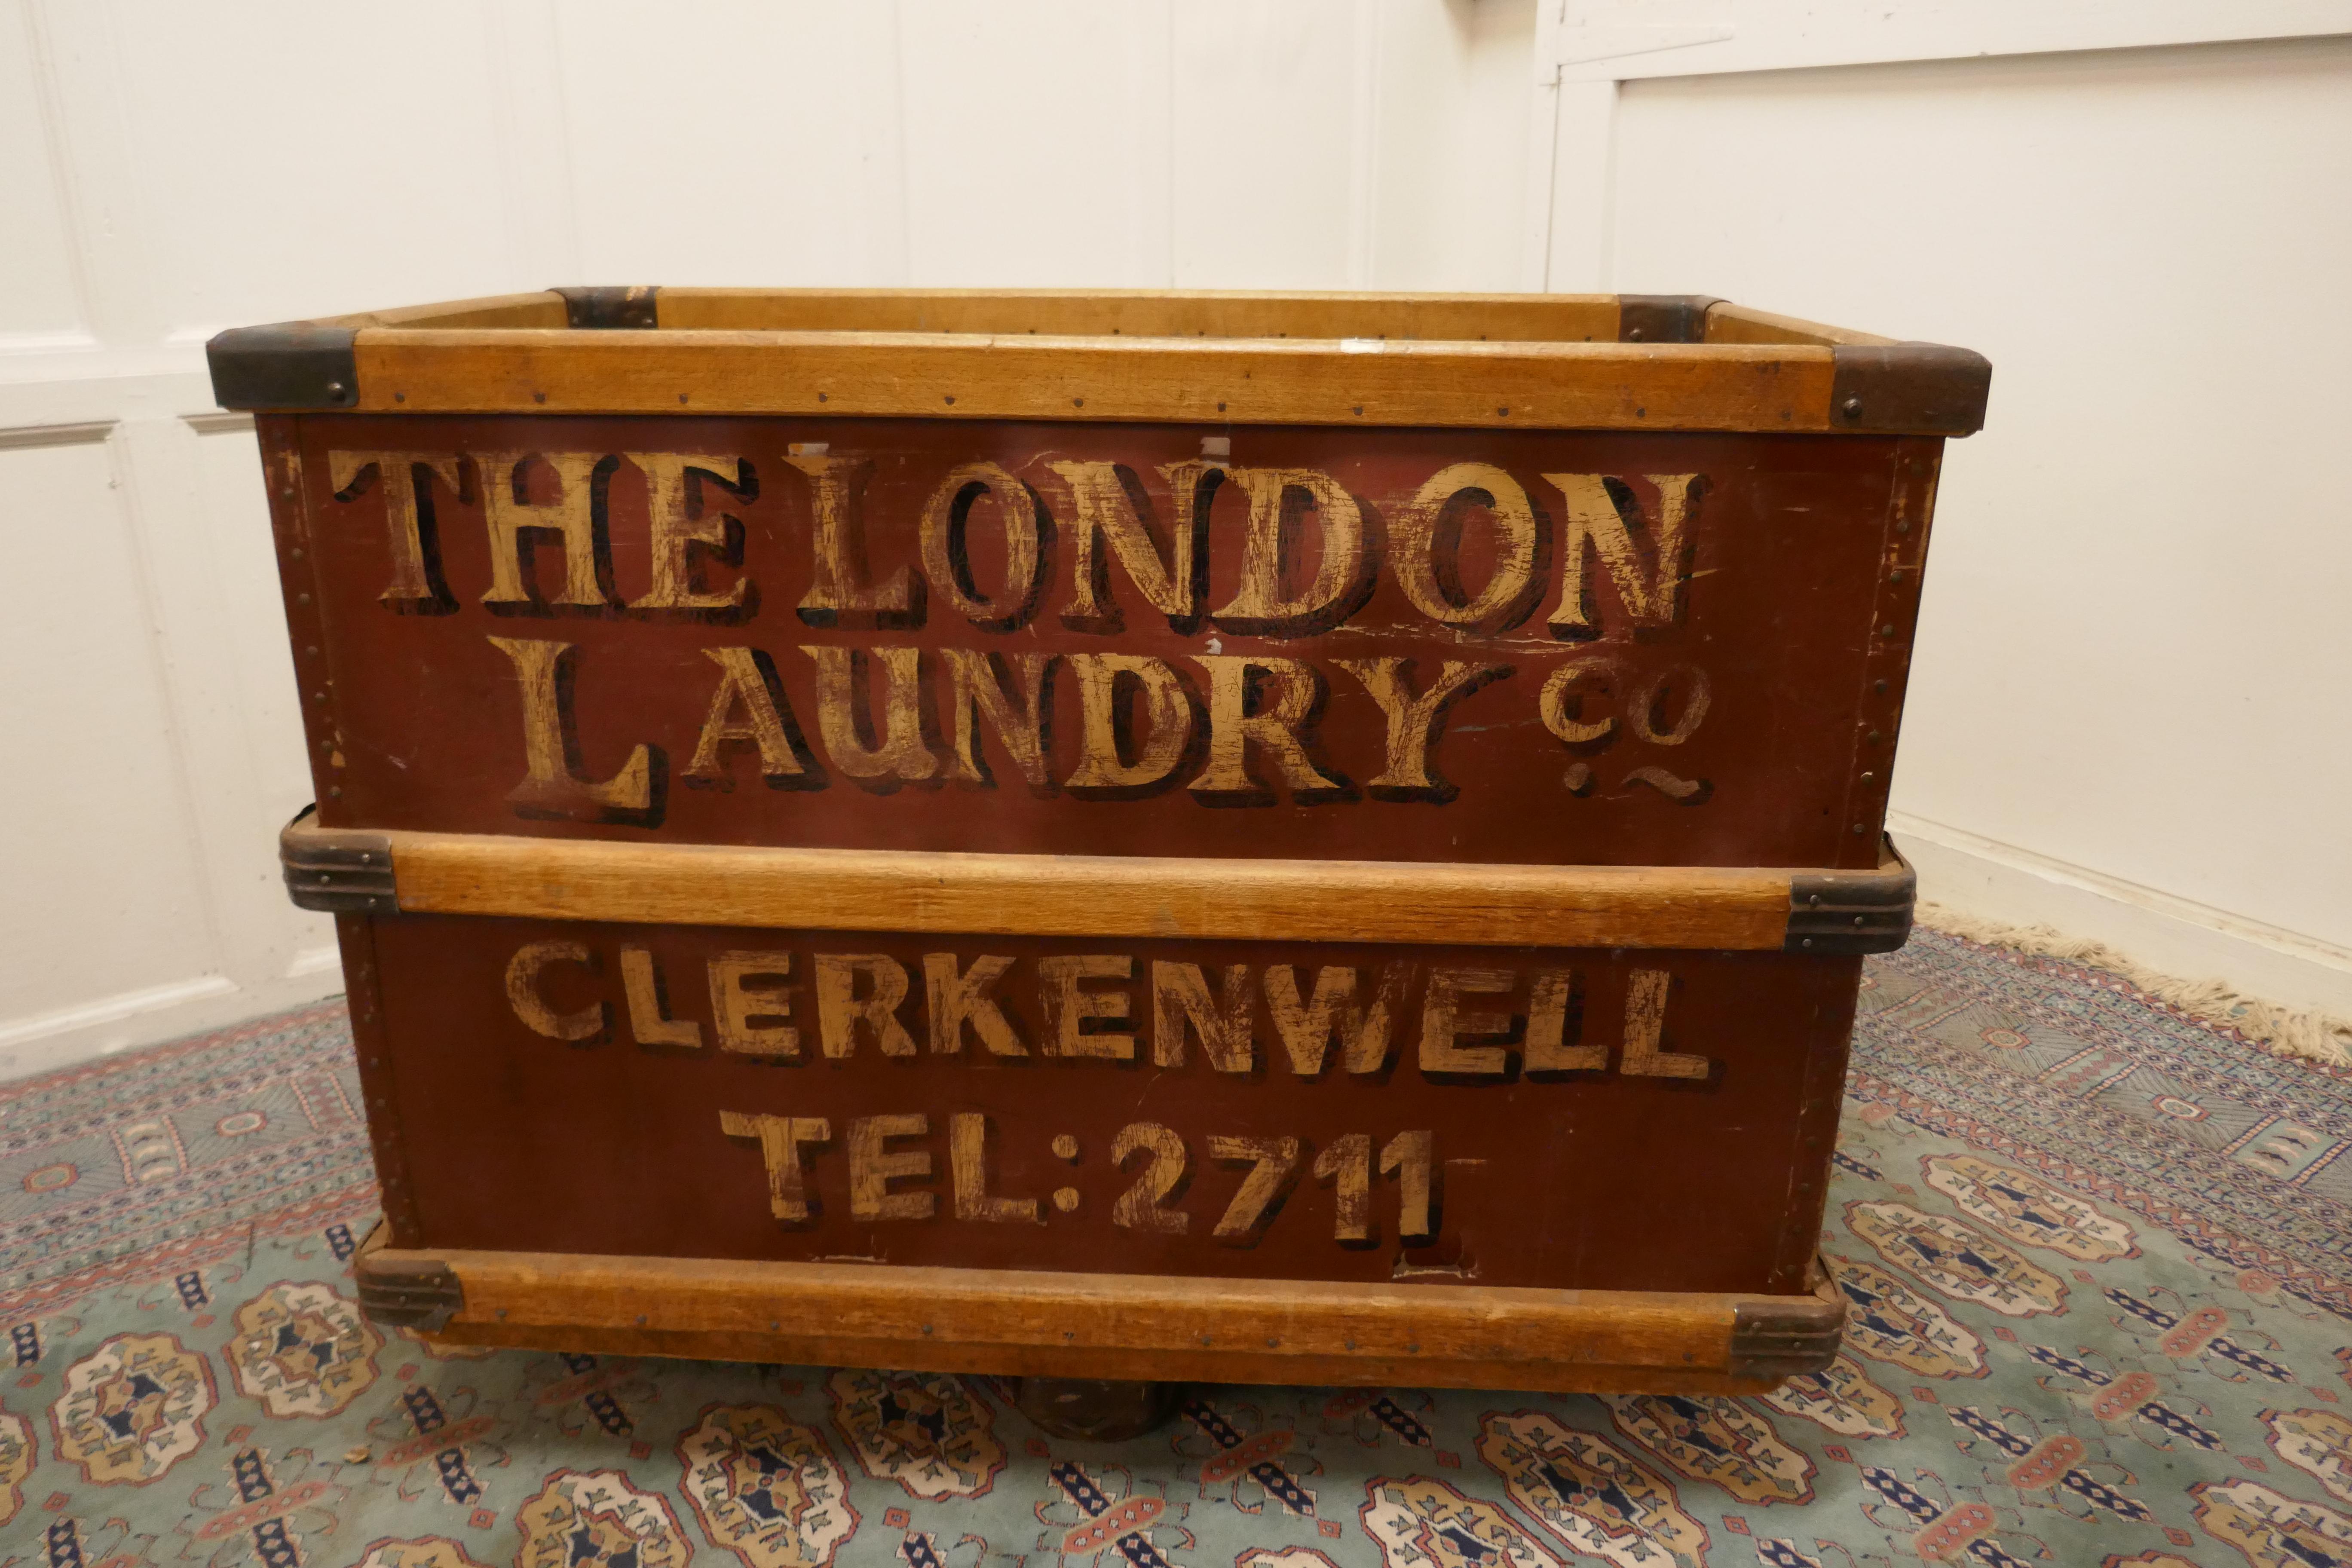 Pine London Laundry Co. Industrial Trolley Cart   Great piece from the London Laundry For Sale